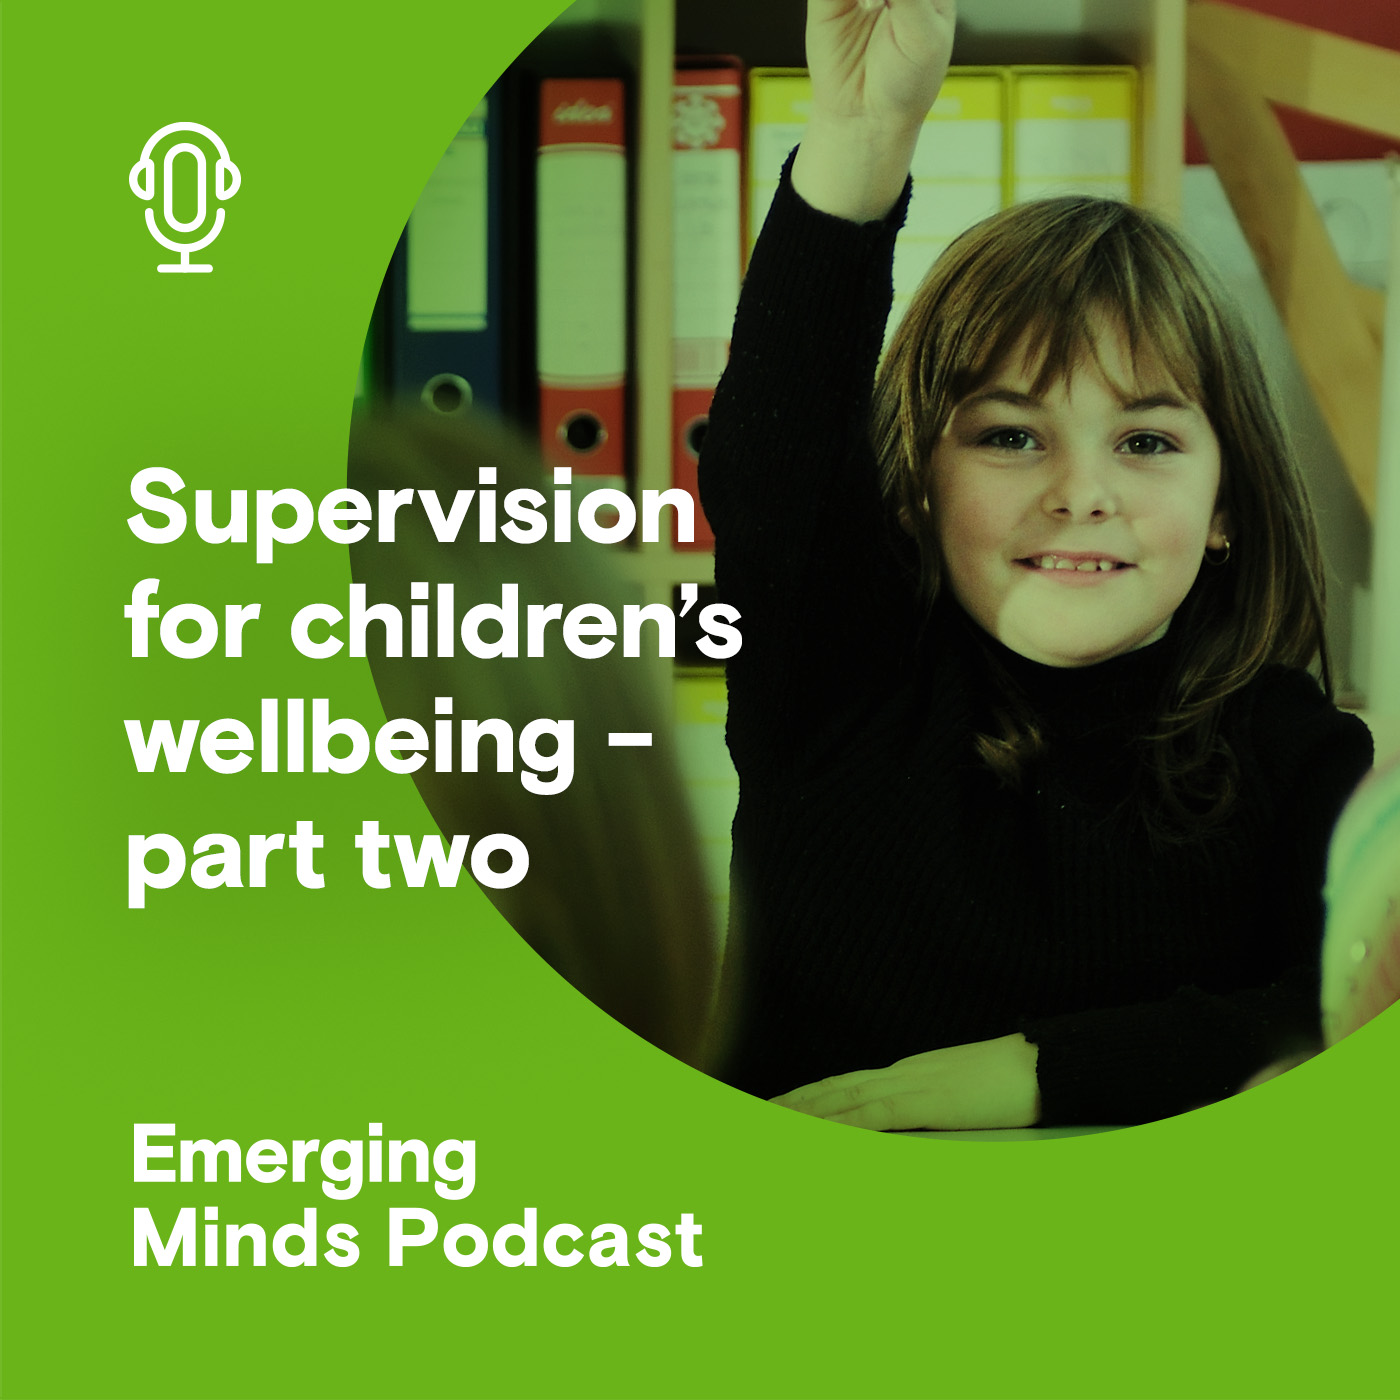 Supervision for children's wellbeing - part two